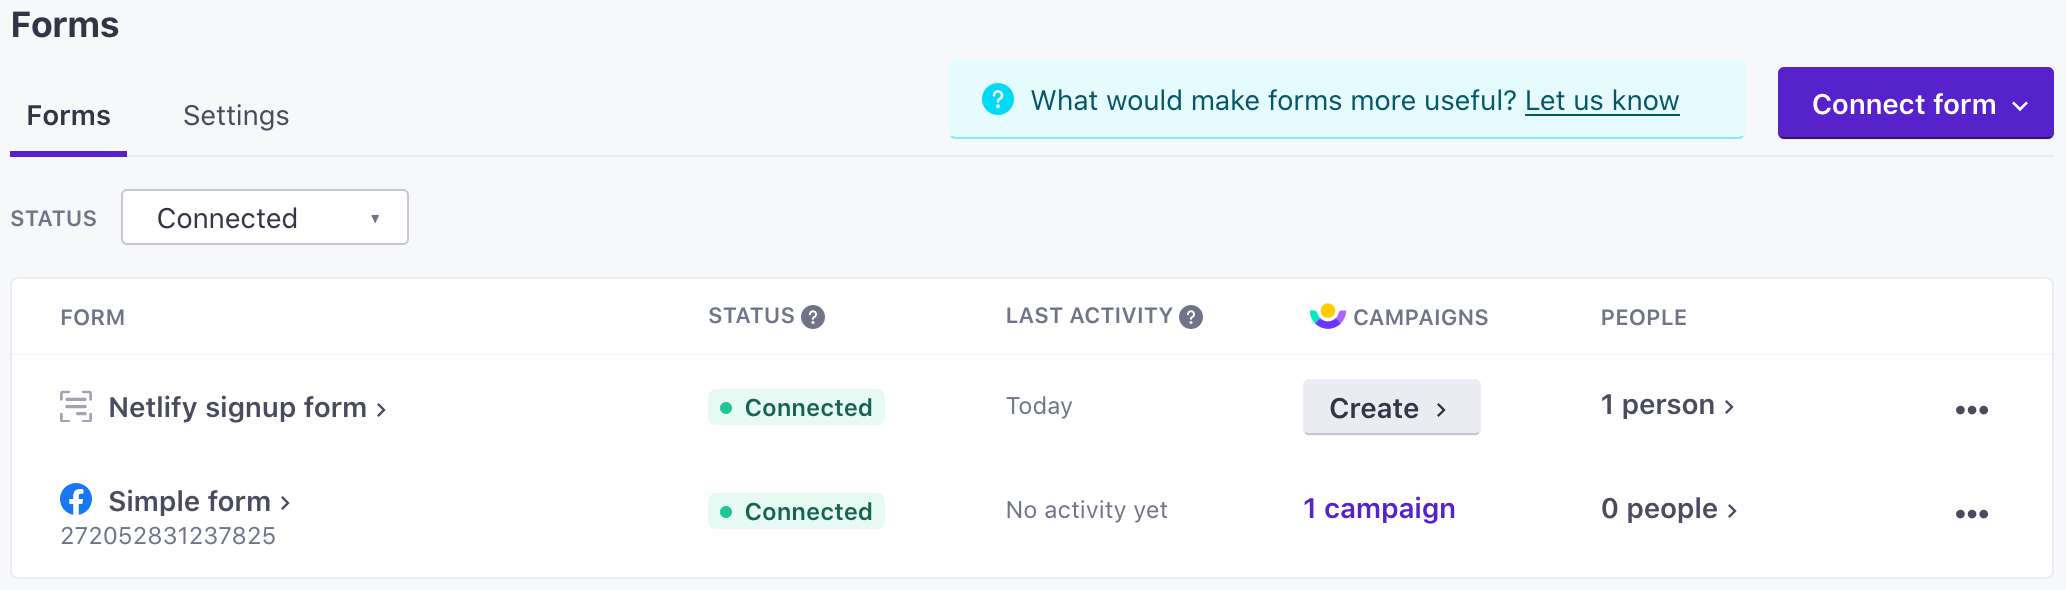 Connect web forms to your workspace